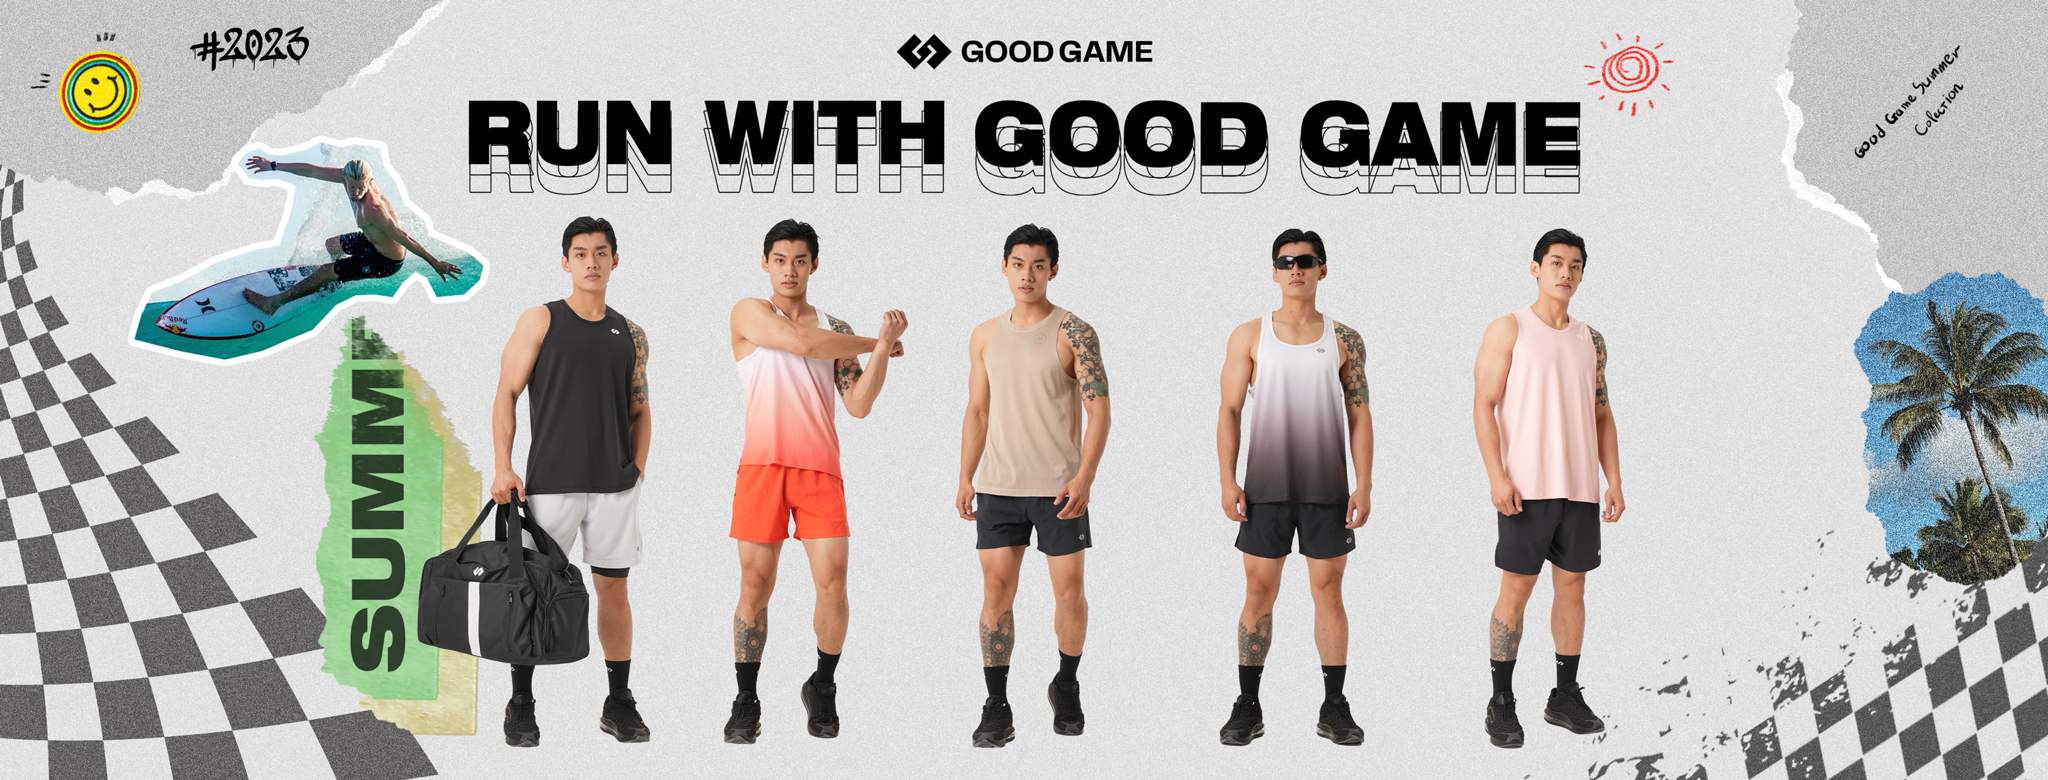 RUN WITH GOOD GAME